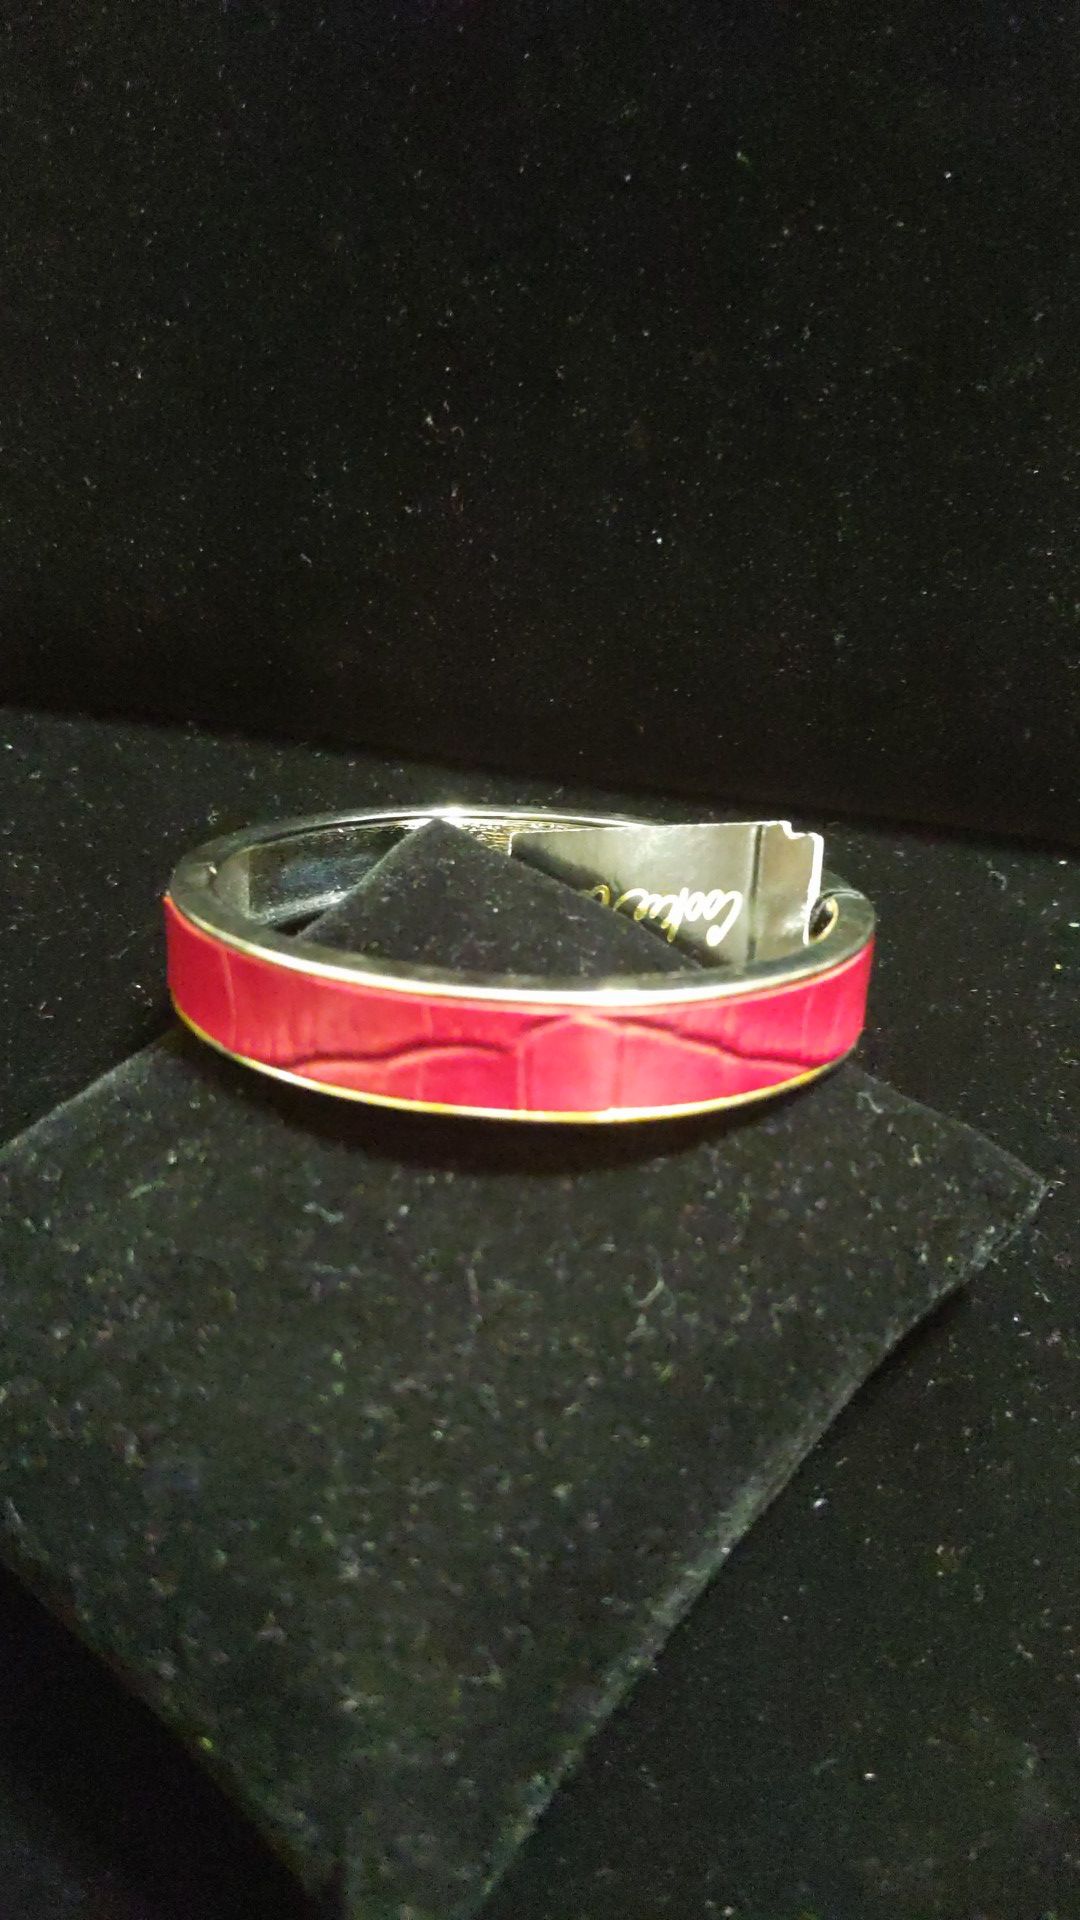 New Cookie Lee bracelet Bangle hinged genuine leather red with silver original tag $24